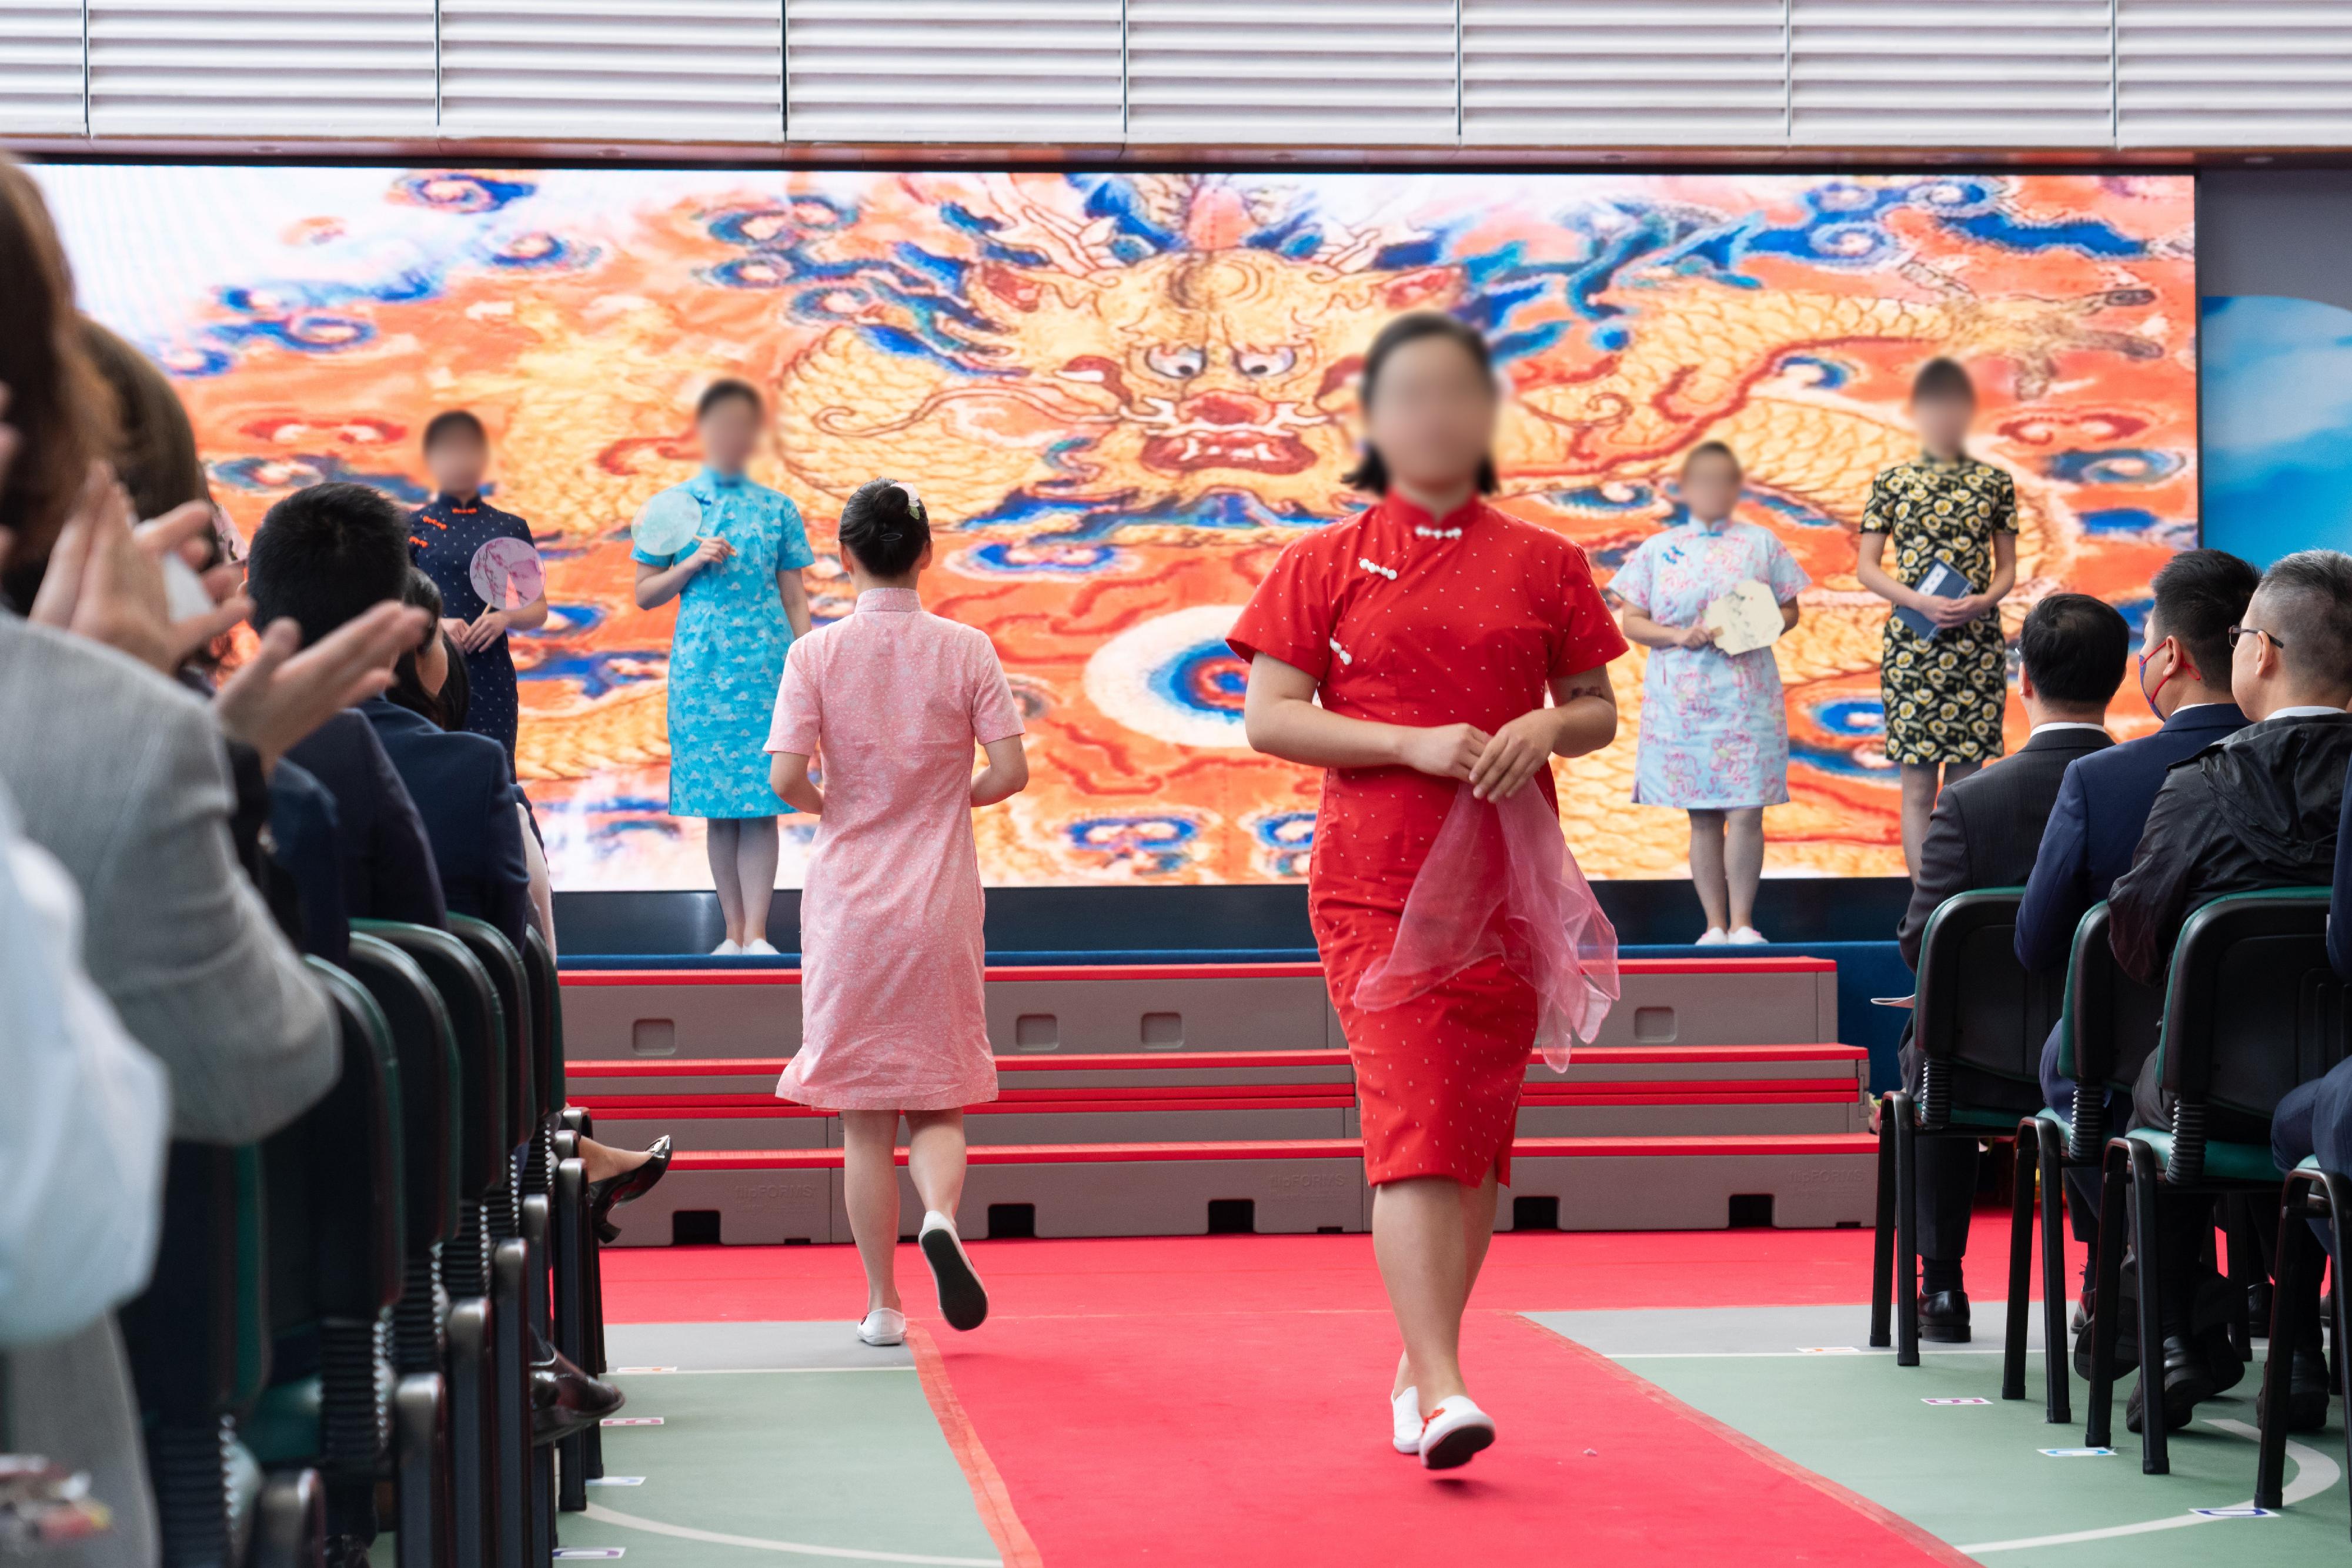 Persons in custody at Lo Wu Correctional Institution of the Correctional Services Department were presented with certificates at a ceremony today (March 20) in recognition of their continuous efforts in pursuing further studies. Photo shows persons in custody demonstrating the cheongsams they made in a fashion show.